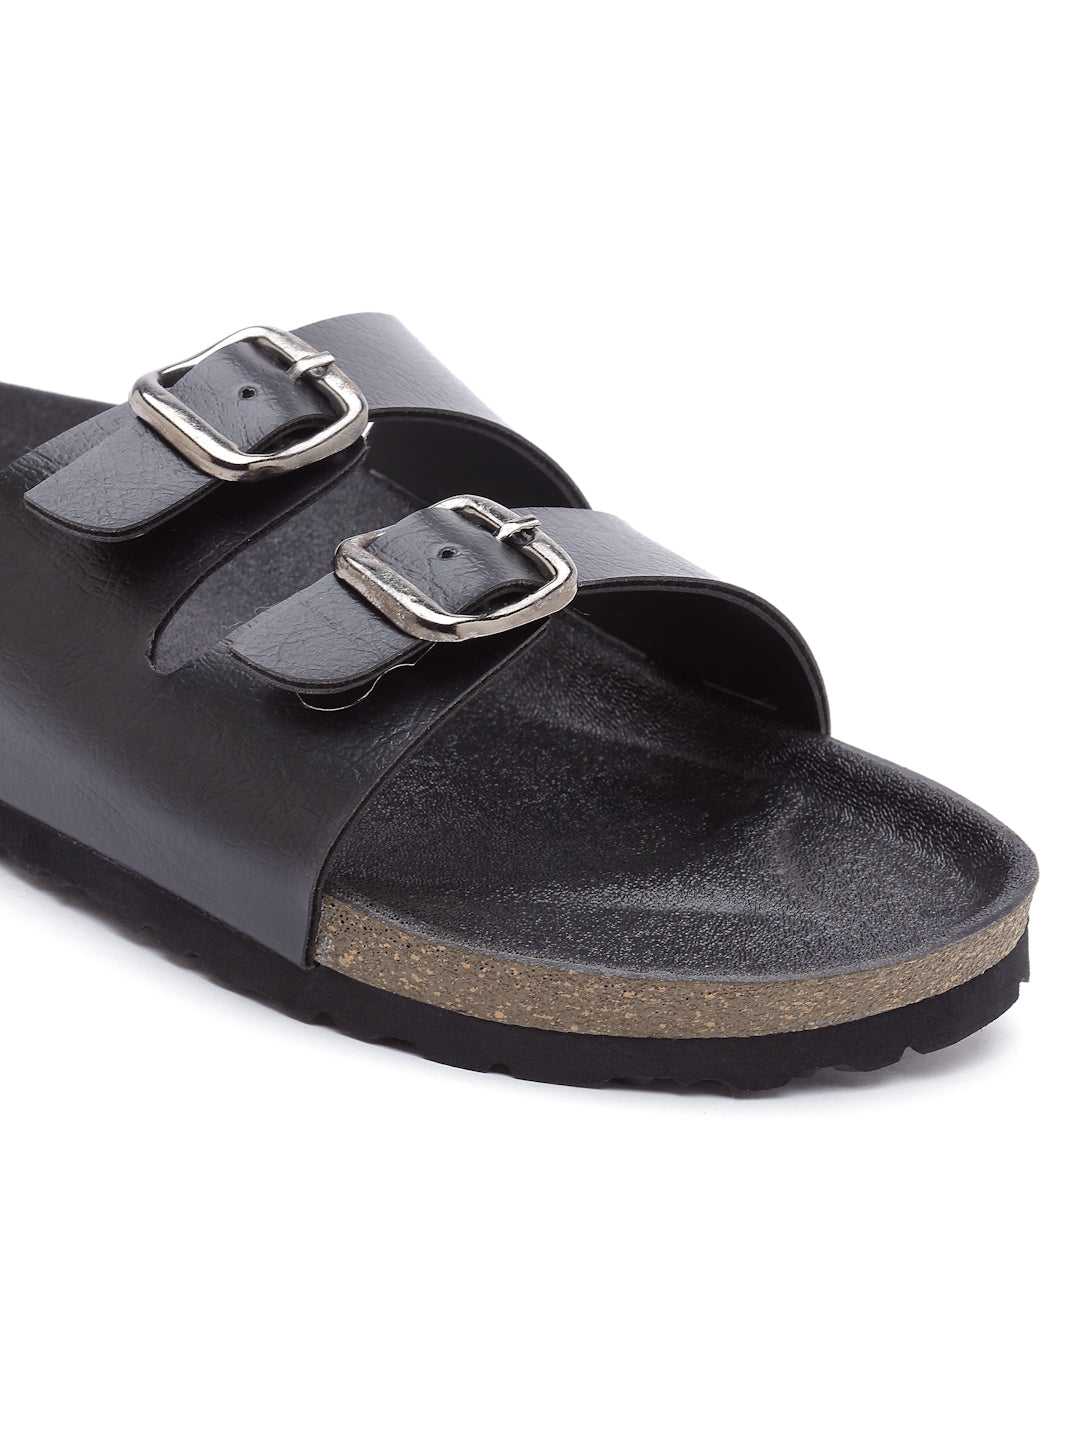 Women's Black Synthetic Leather Casual Sandal